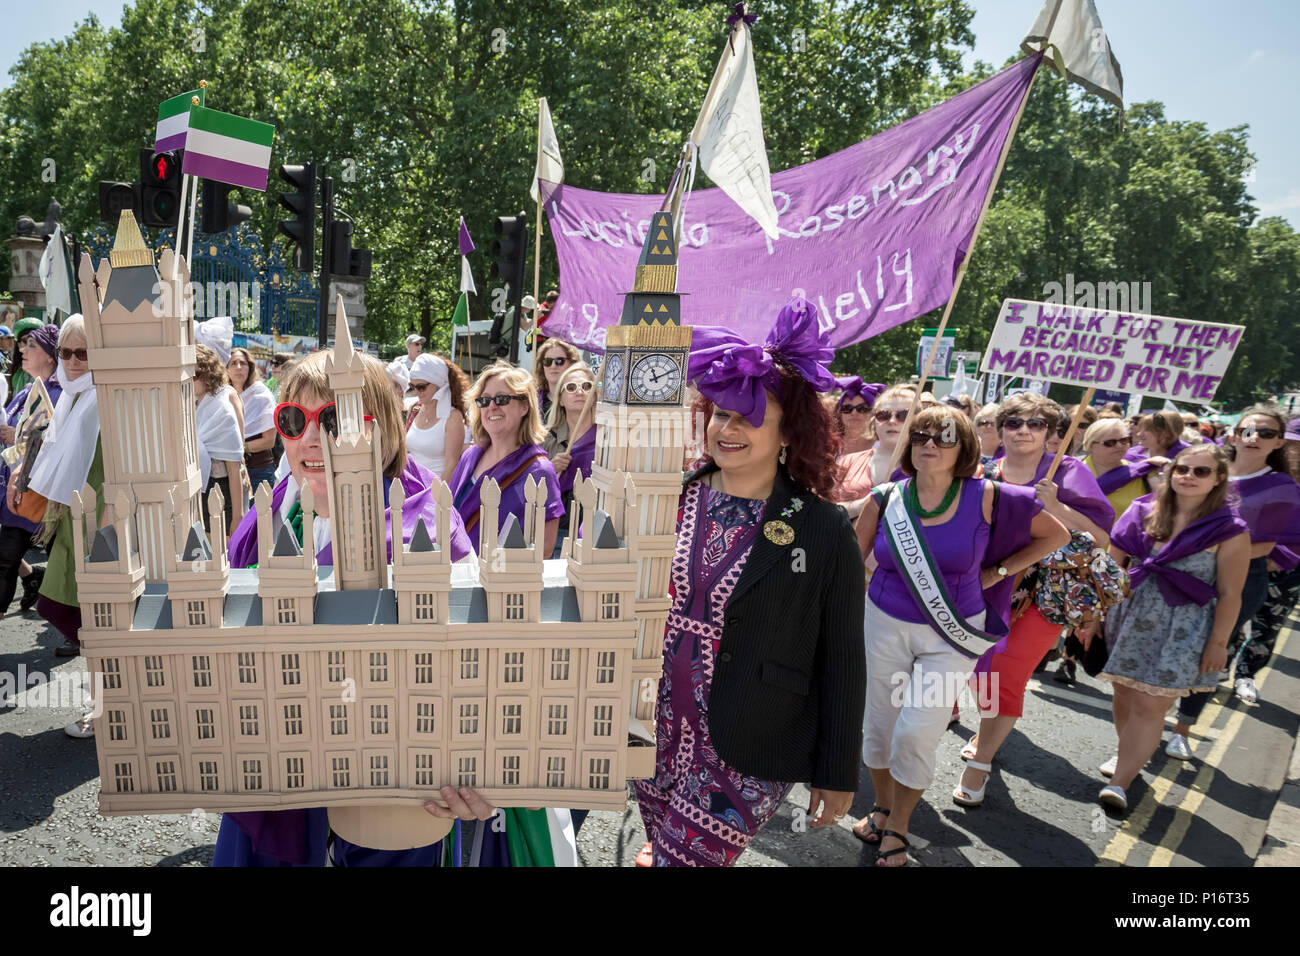 London, UK. 10th June 2018. Thousands of women join Processions 2018. Dressing in the green, white and purple tri-colour scheme of the Suffragette’s Women's Social and Political Union, they marched from Hyde Park to Parliament Square to mark 100 years since the Representation of the People Act, which gave British women the right to vote and stand for public office in the UK. Credit: Guy Corbishley/Alamy Live News Stock Photo